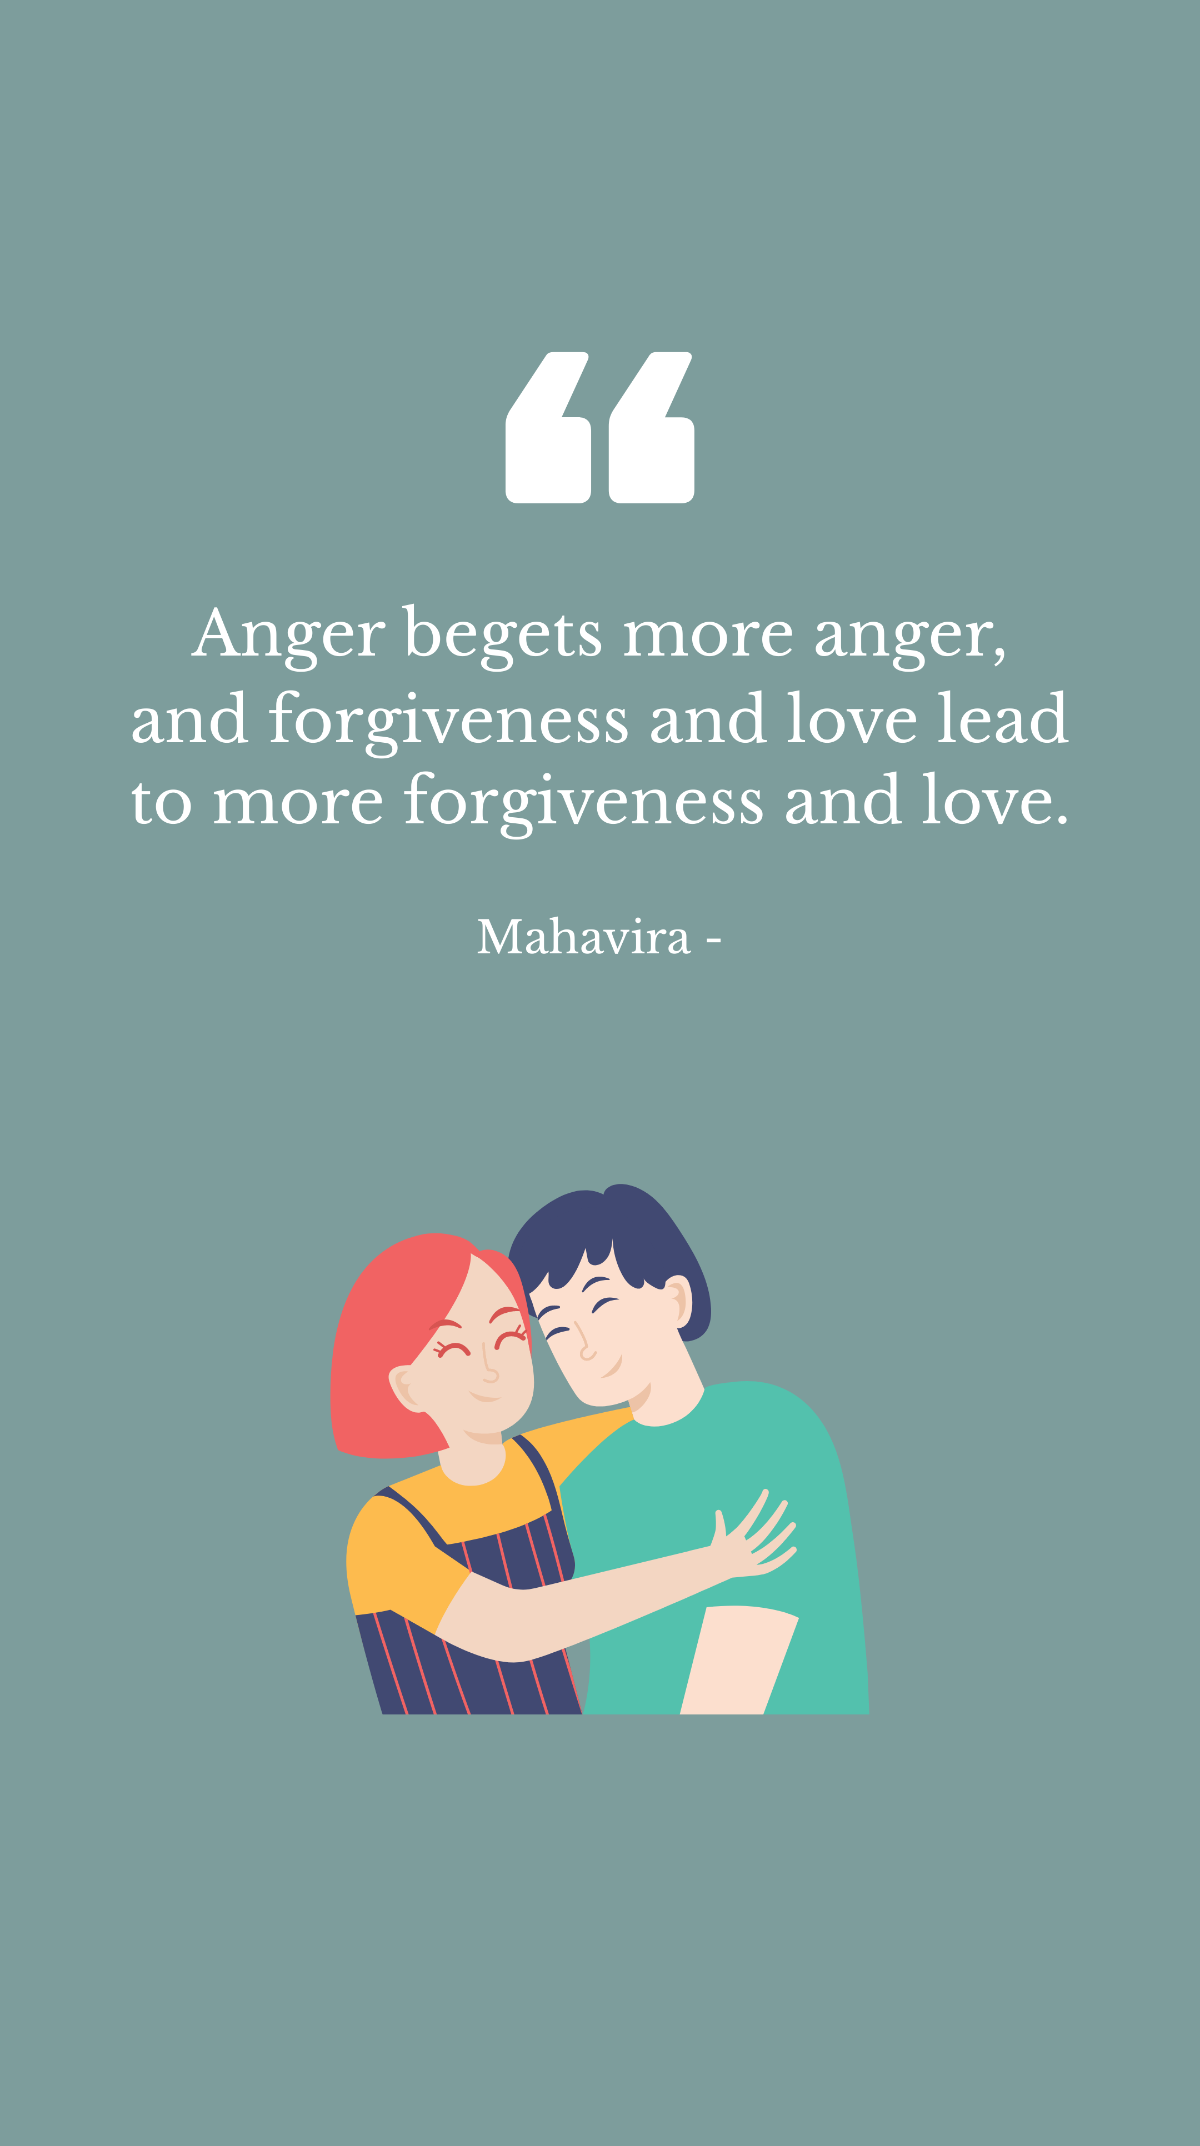 Free Mahavira - Anger begets more anger, and forgiveness and love lead to more forgiveness and love. Template